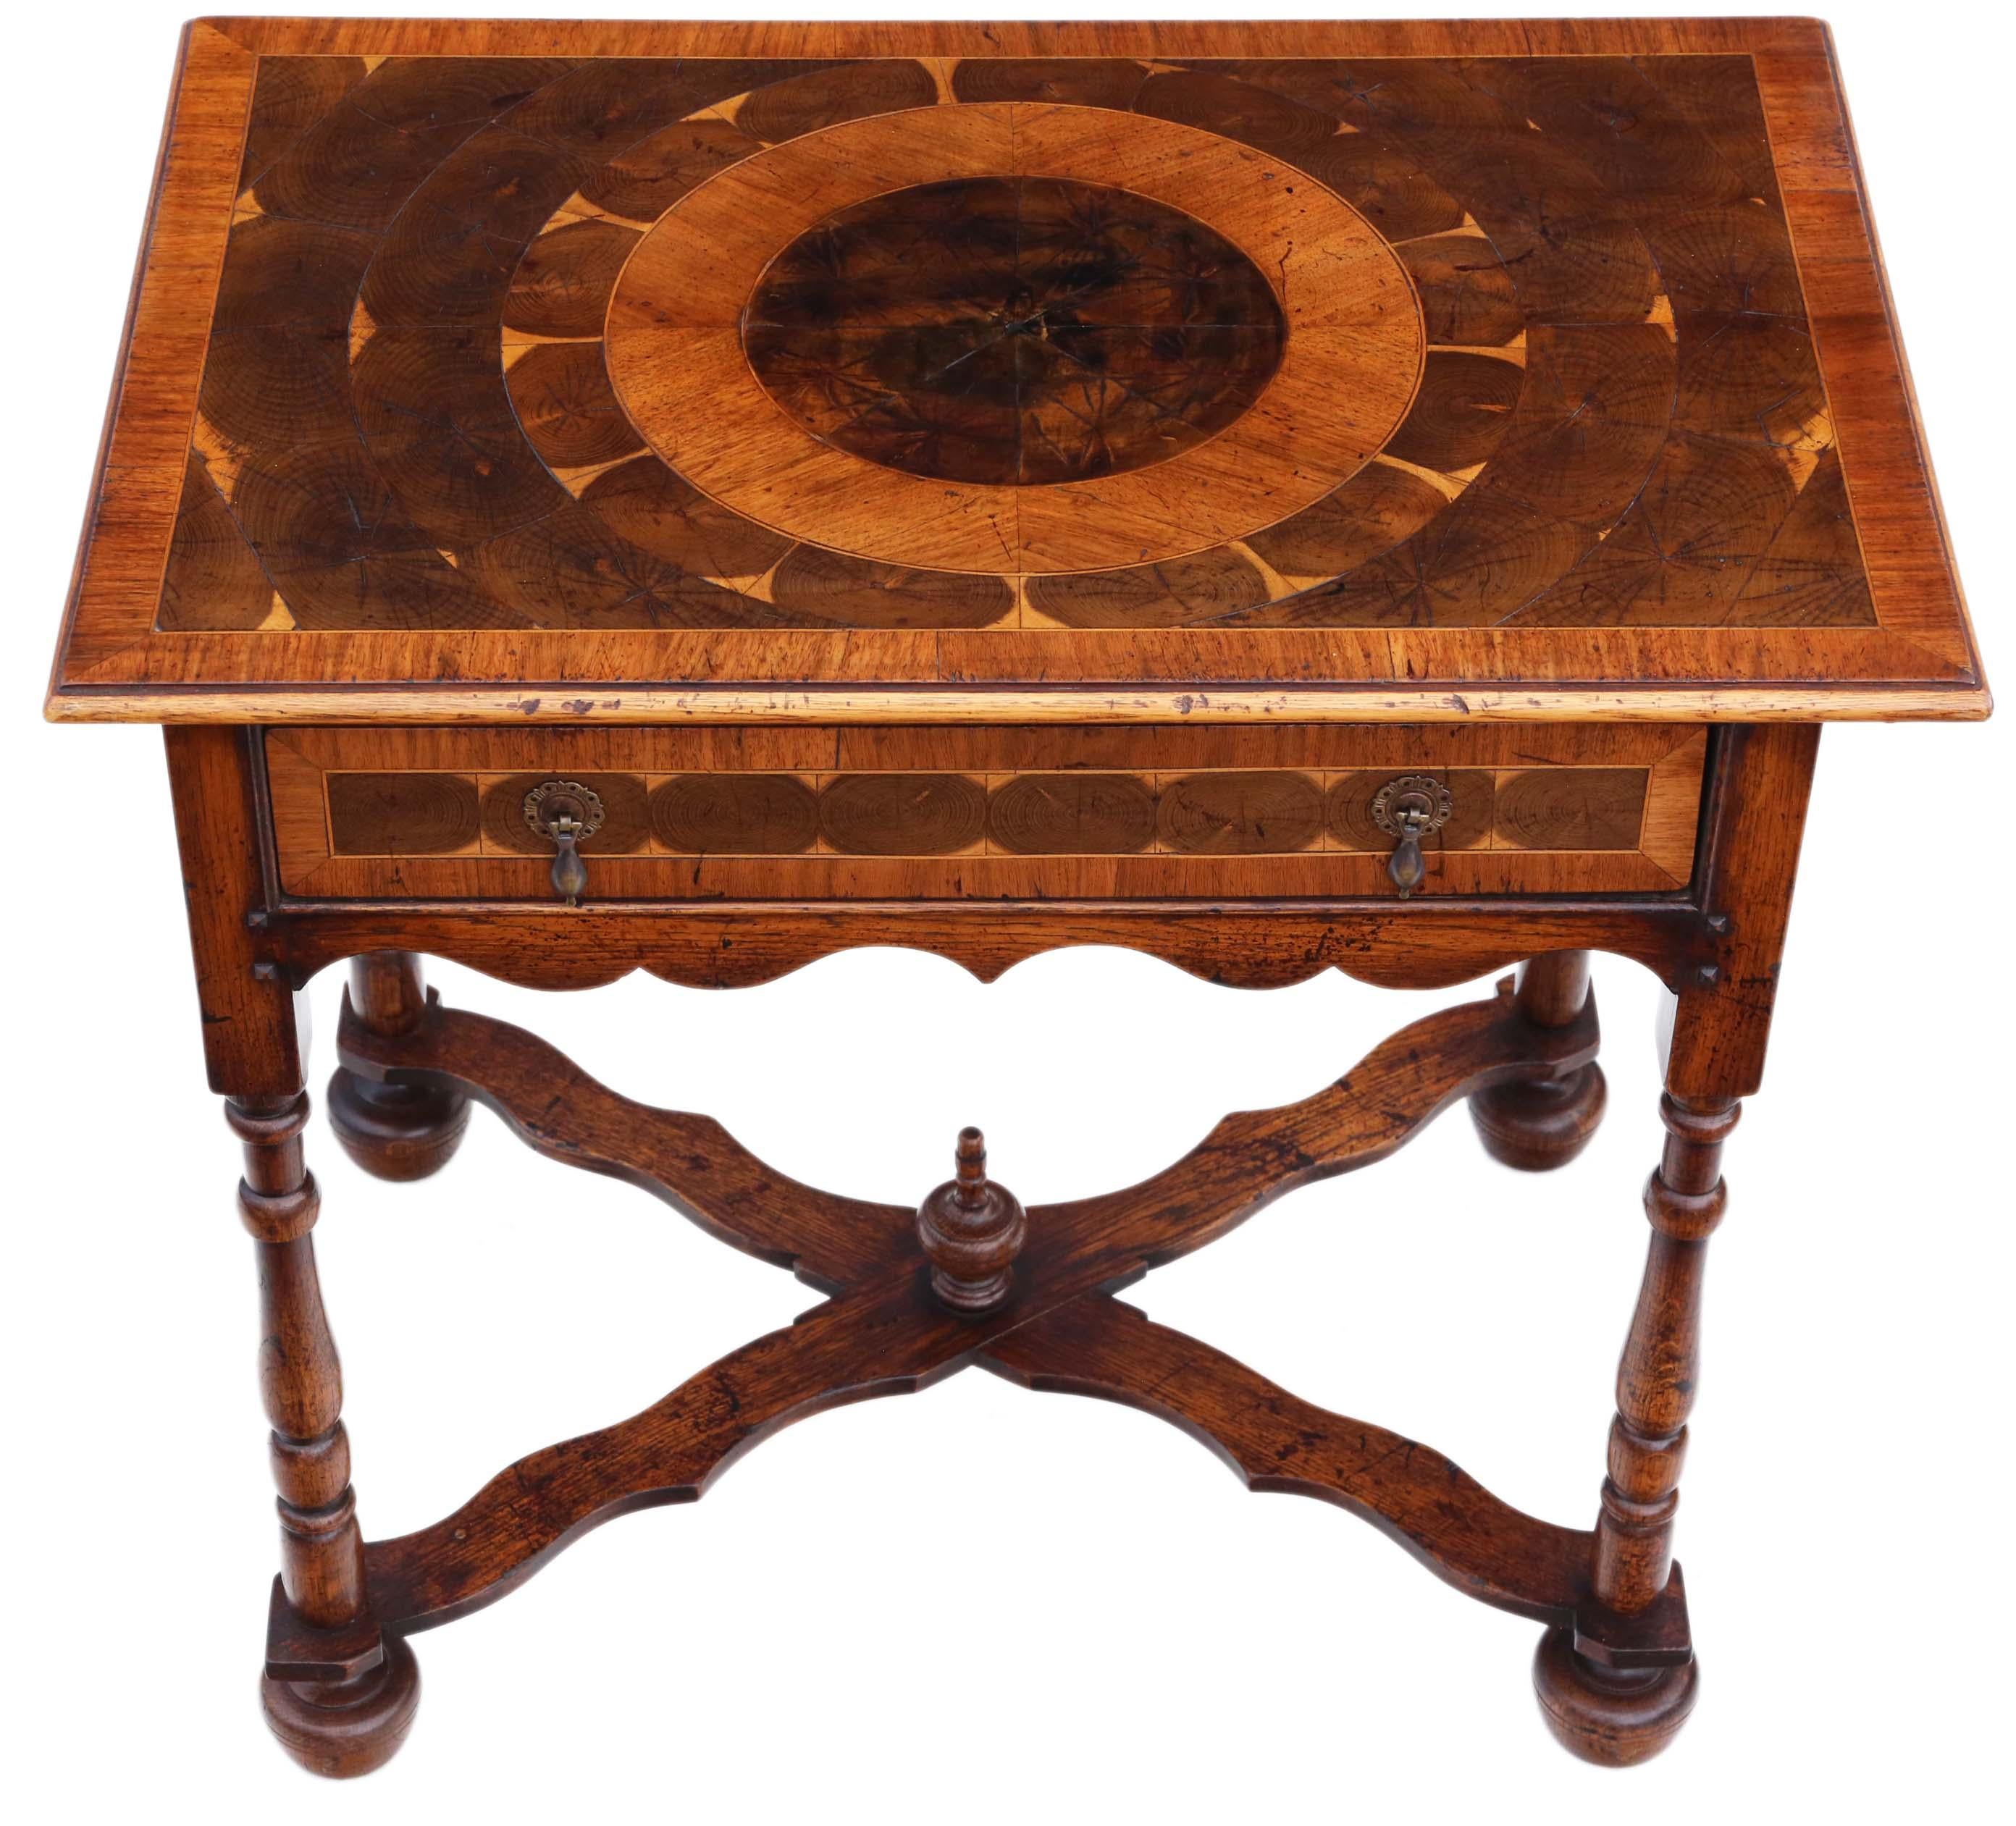 Antique fine quality queen Anne revival walnut and oyster veneer writing side or occasional table C1950. Veneer on oak construction, very heavy and strong.

No loose joints and no woodworm. Full of character and charm. A rare and attractive